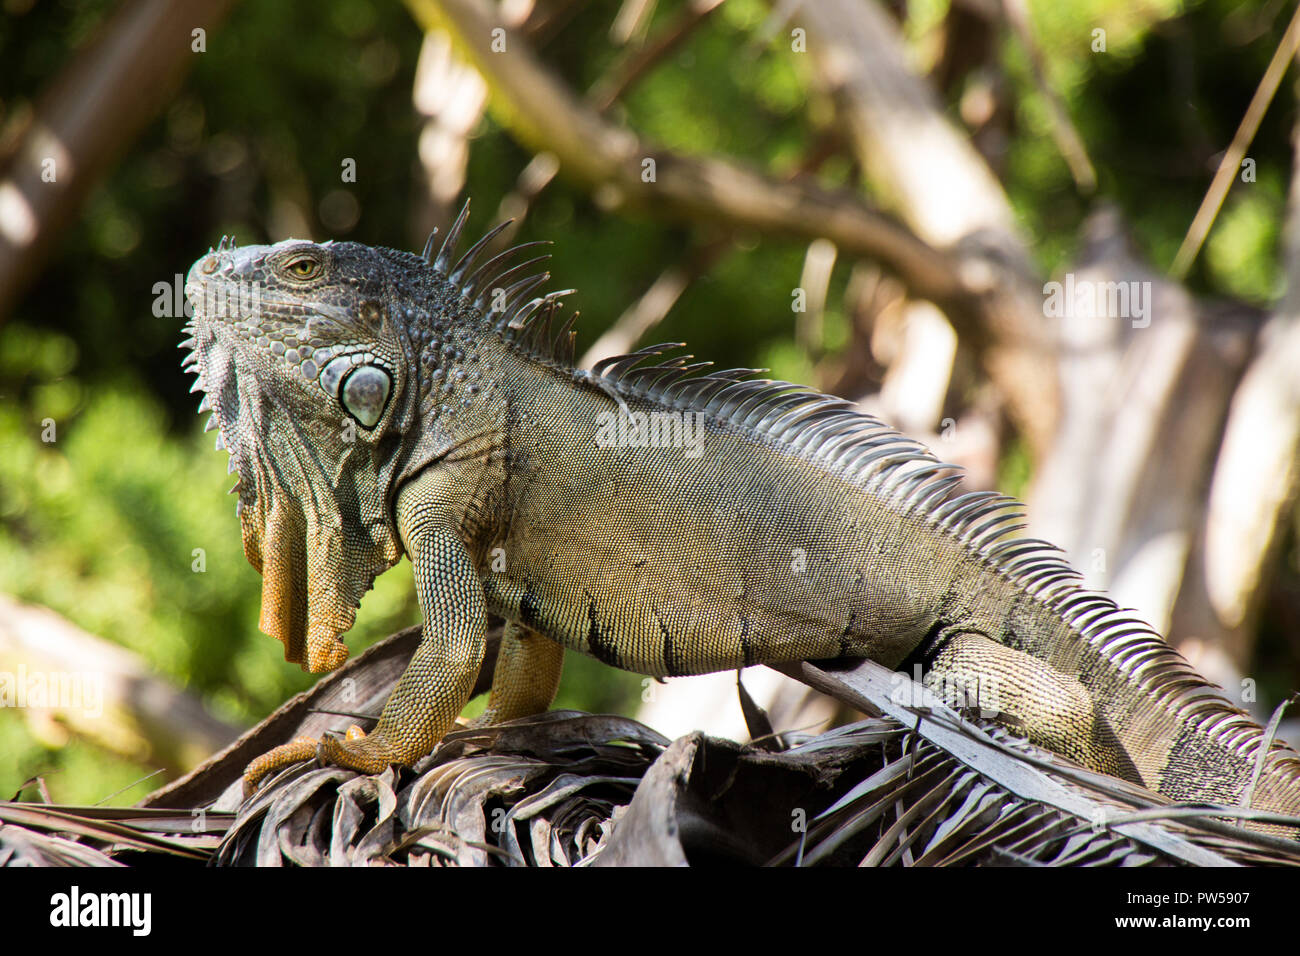 Iguana at the island of san andres, Colombia Stock Photo